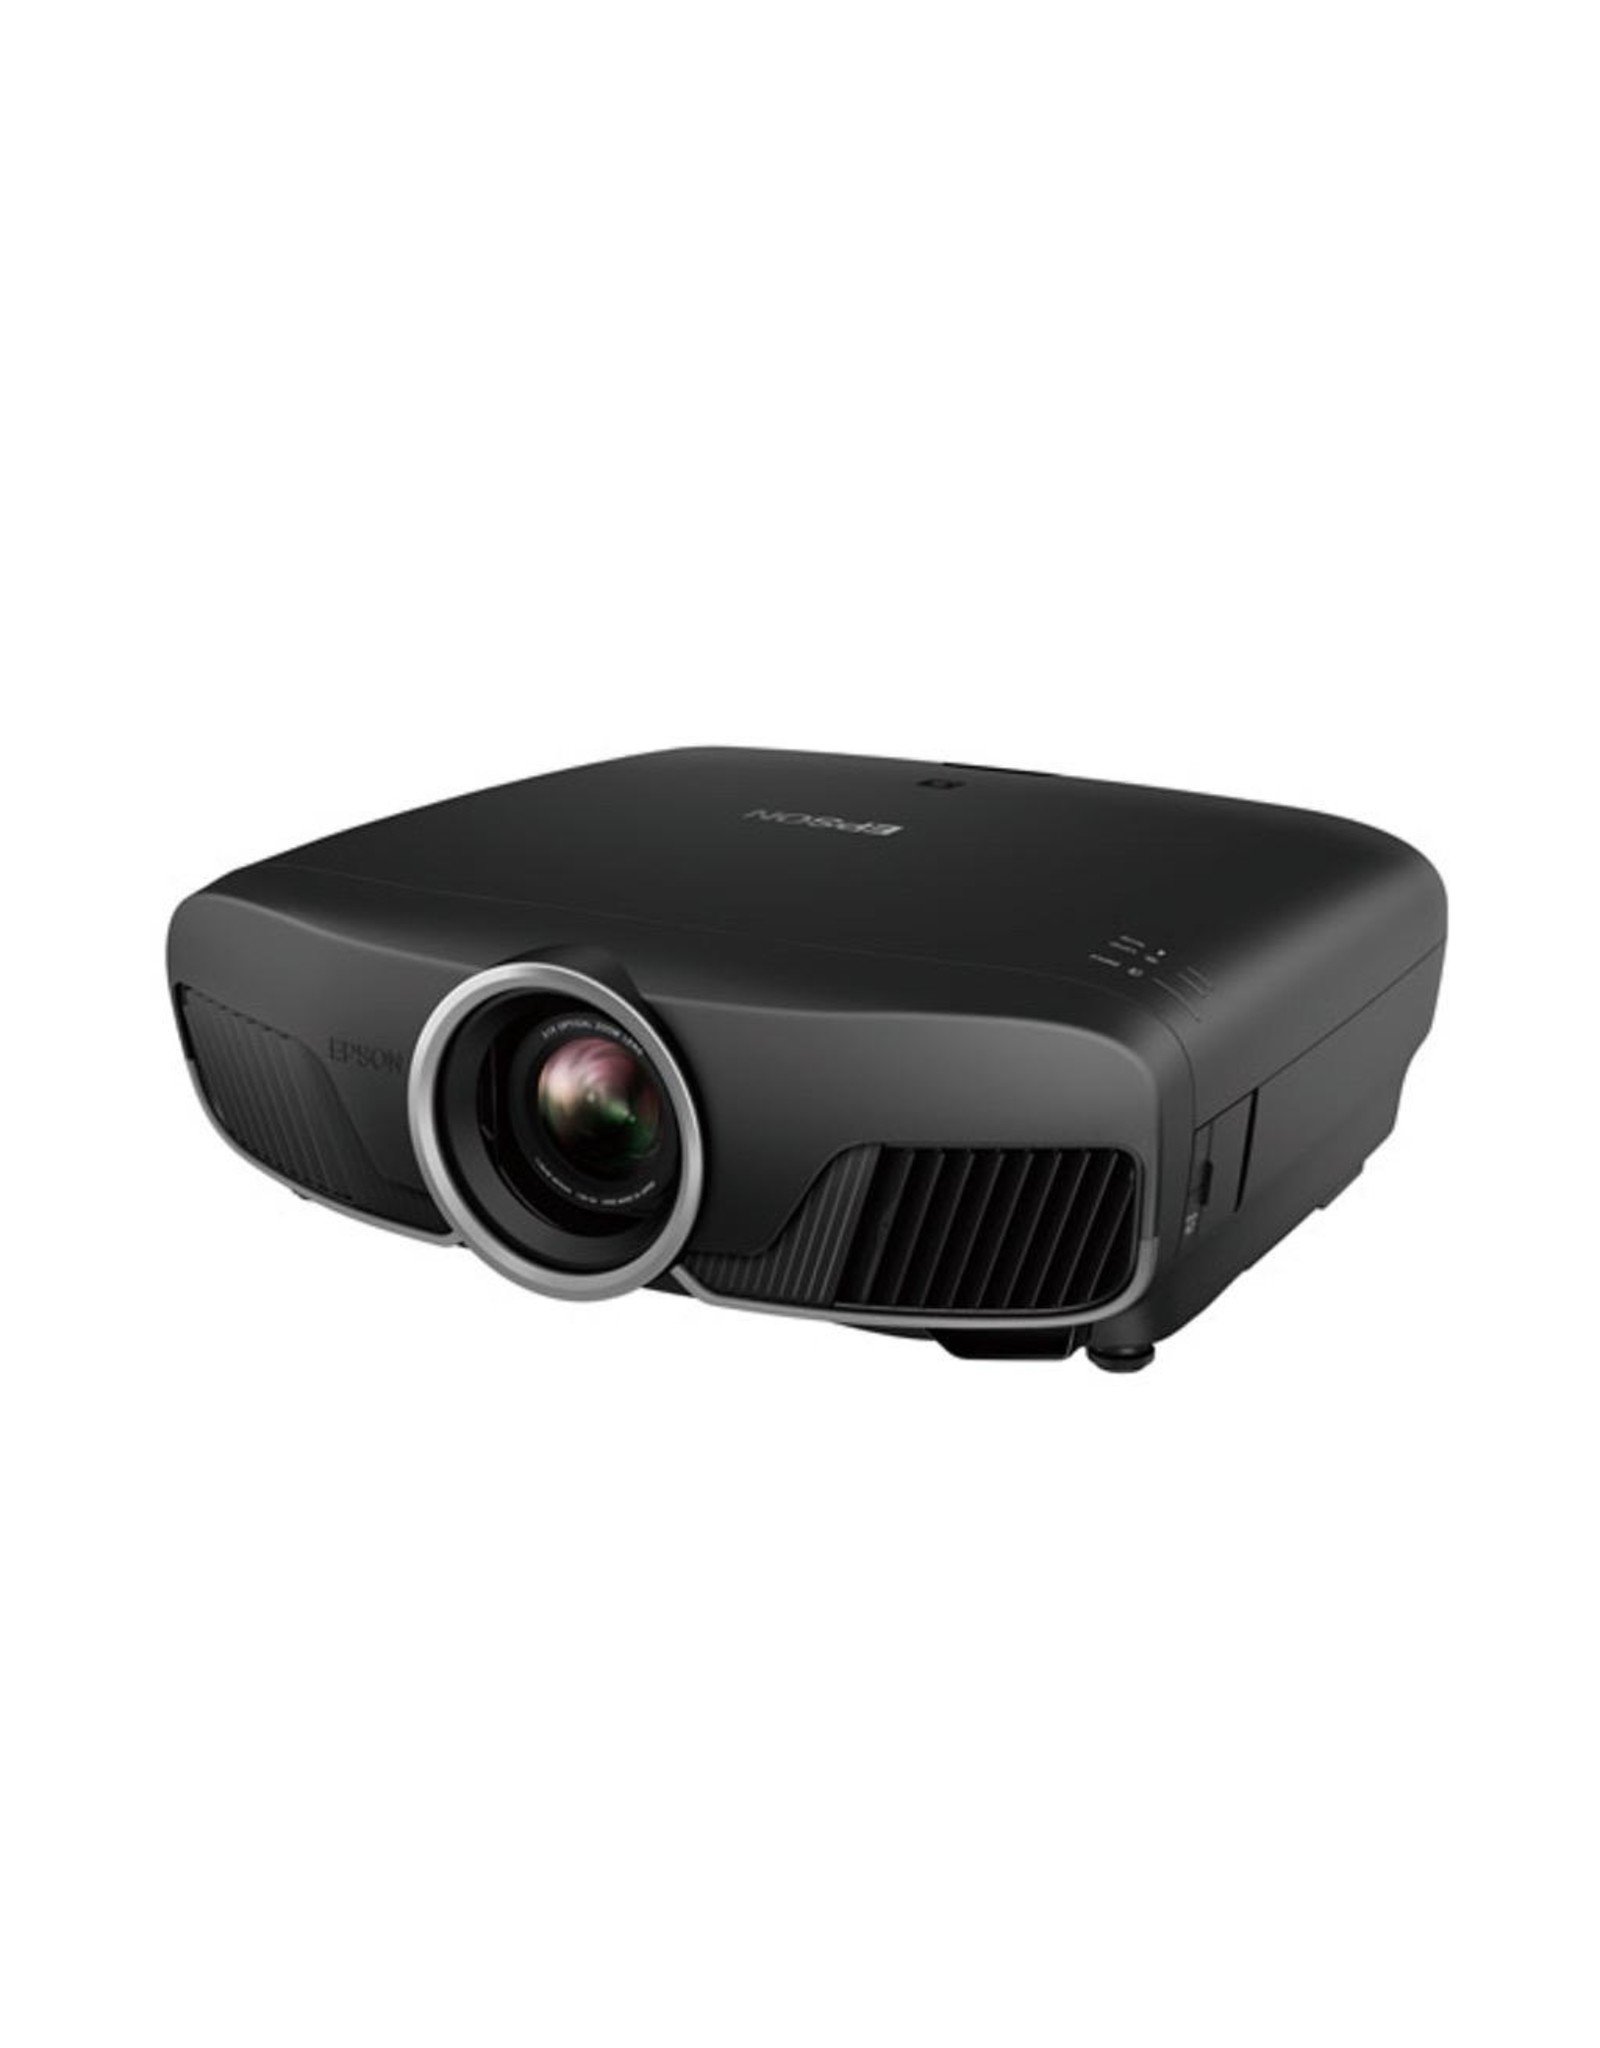 EPSON EPSON TW9400 4K Compatible Projector, BLACK  	•	2.35:1 Lens memory function 	•	130” 2.35:1 throw 4.1m - 6.4m